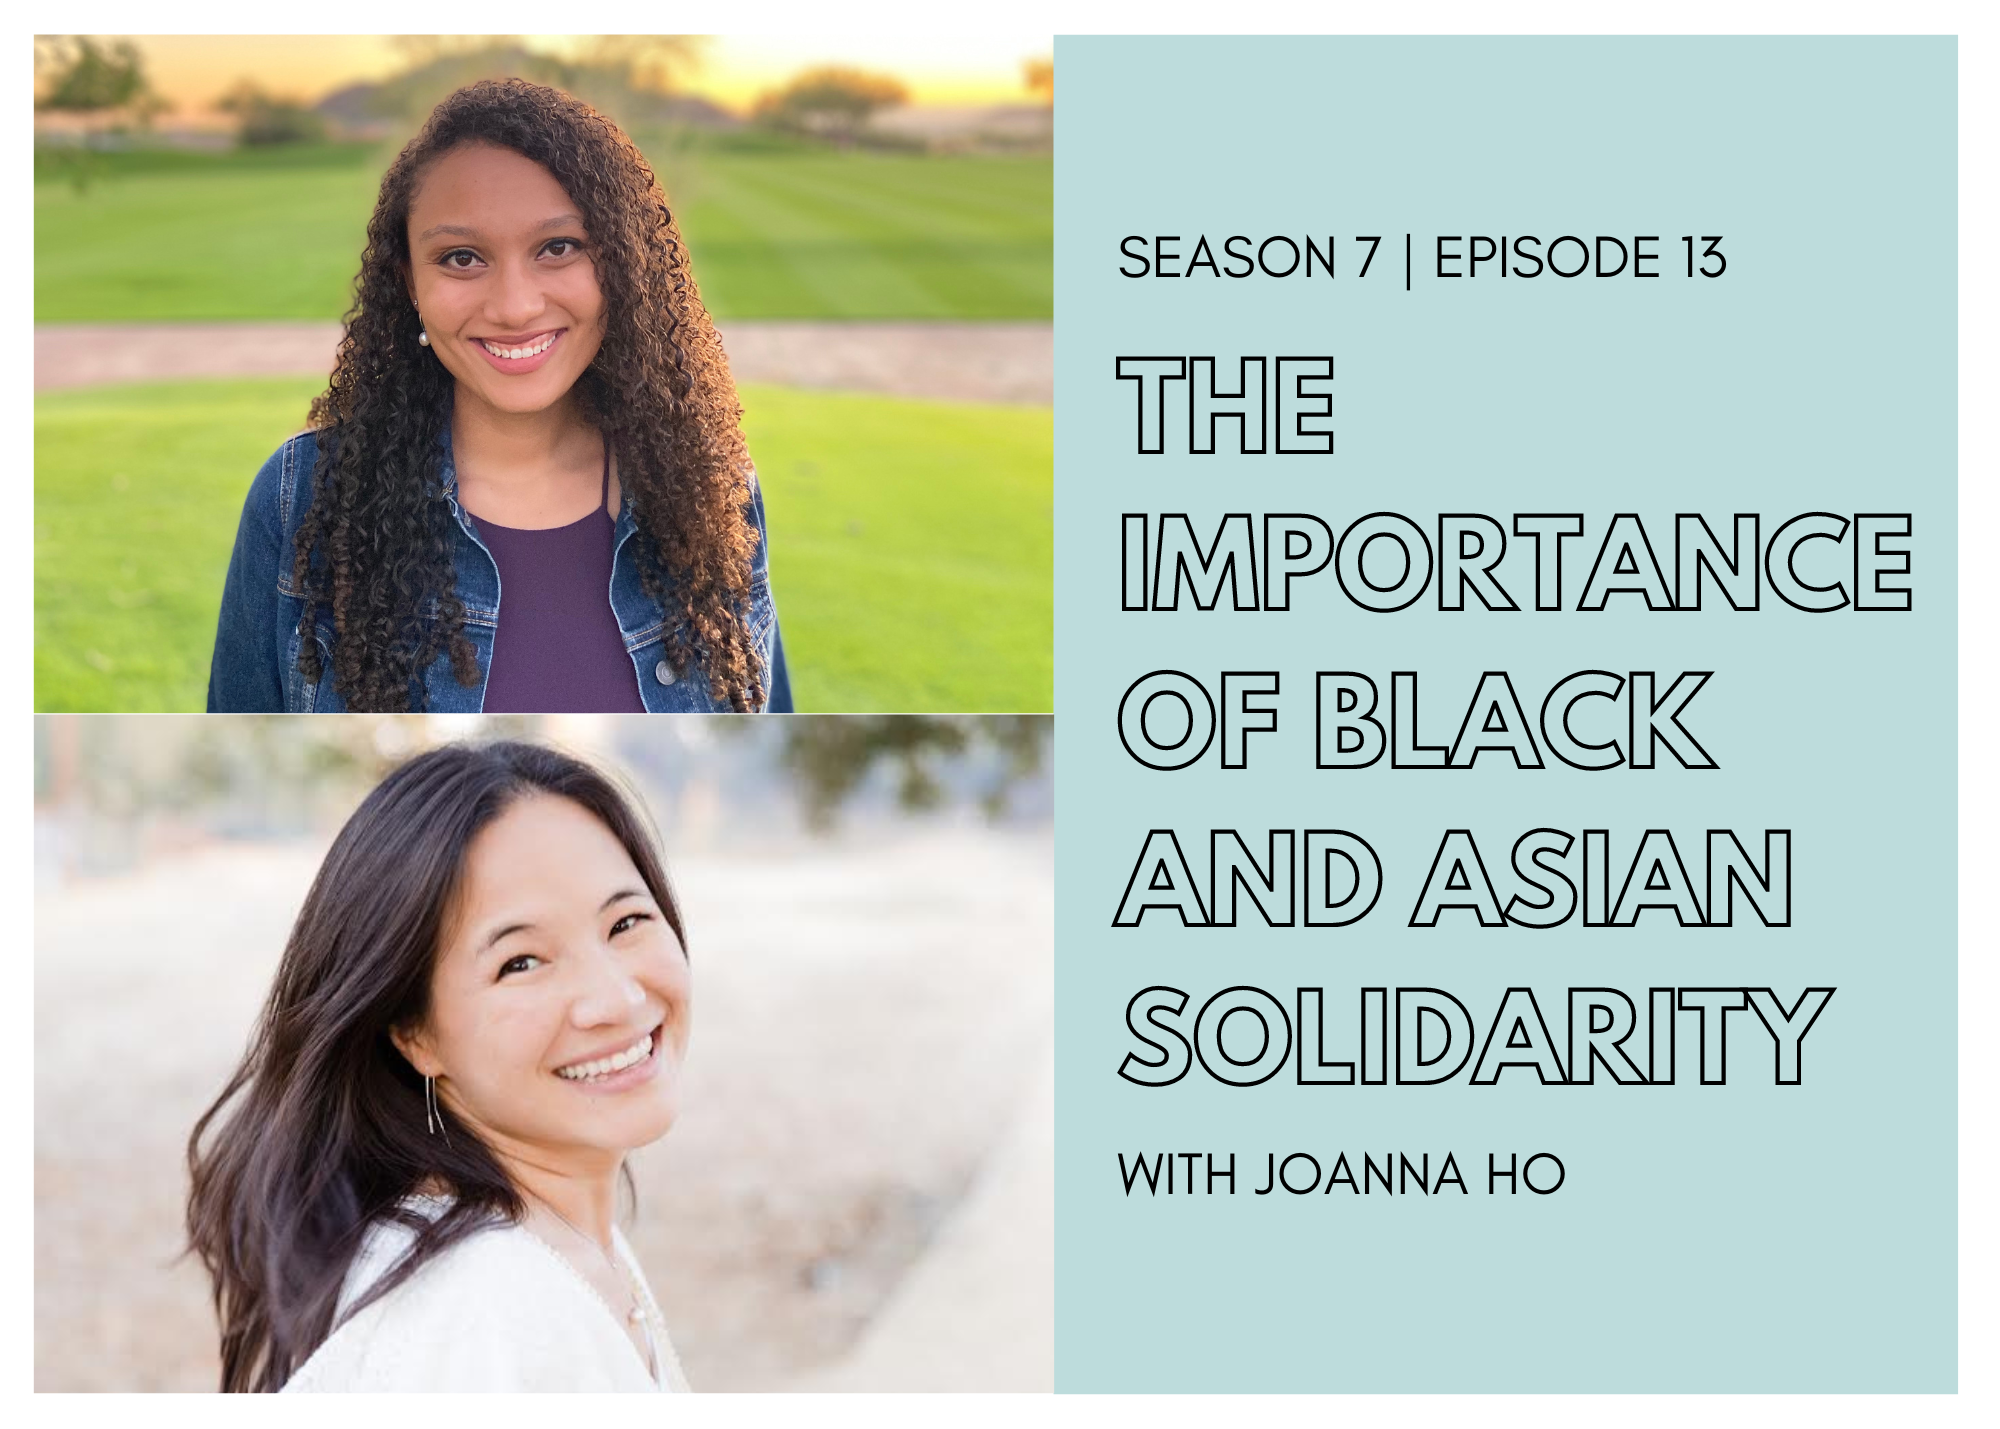 The Importance of Black and Asian Solidarity with Joanna Ho